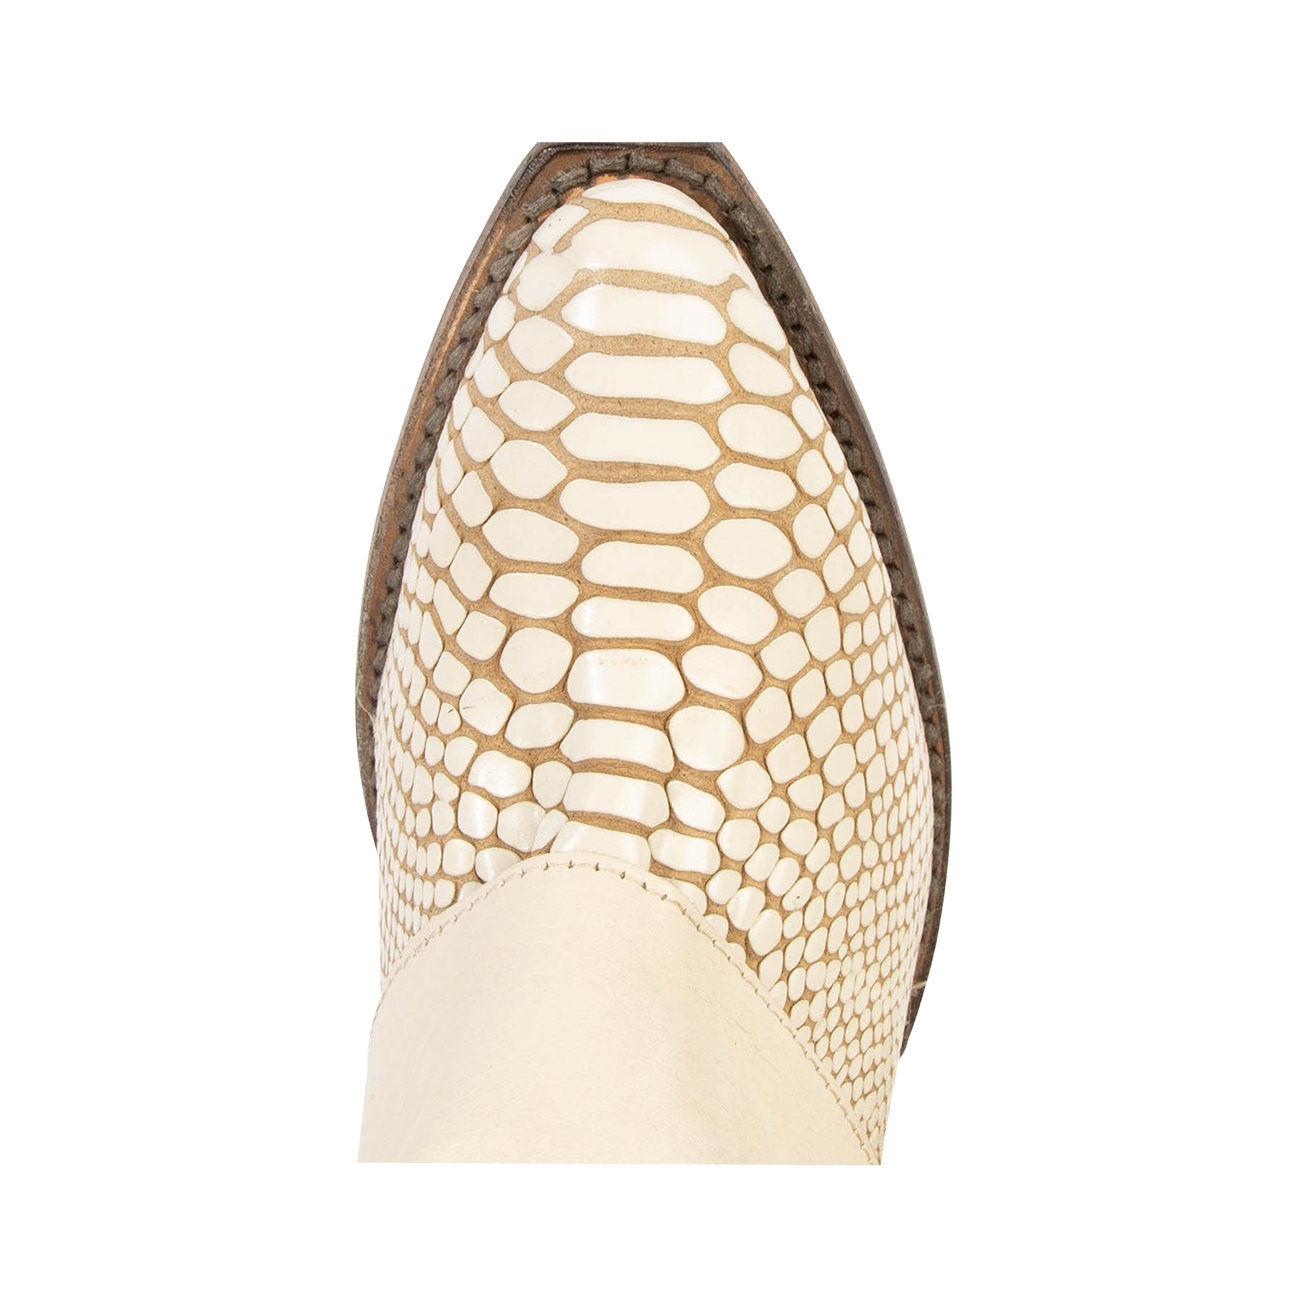 Top view showing pointed toe with decorative stitching on FREEBIRD women's Jules white snake leather high flare heel western boot